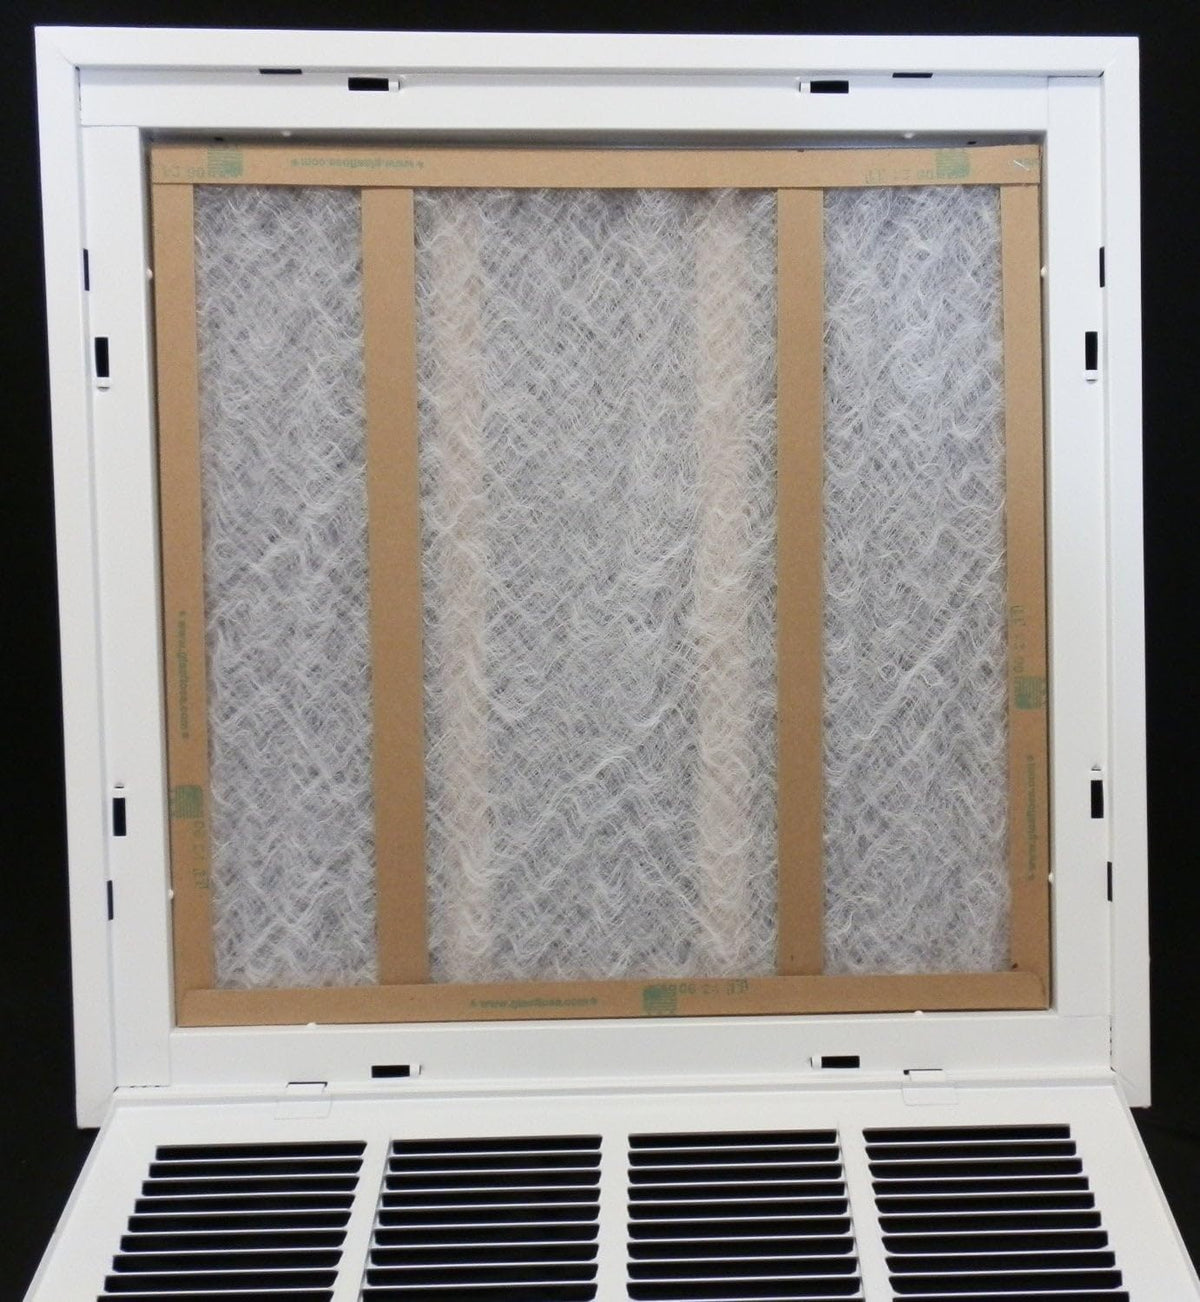 10&quot; X 34&quot; Steel Return Air Filter Grille for 1&quot; Filter - Removable Frame - [Outer Dimensions: 12 5/8&quot; X 36 5/8&quot;]